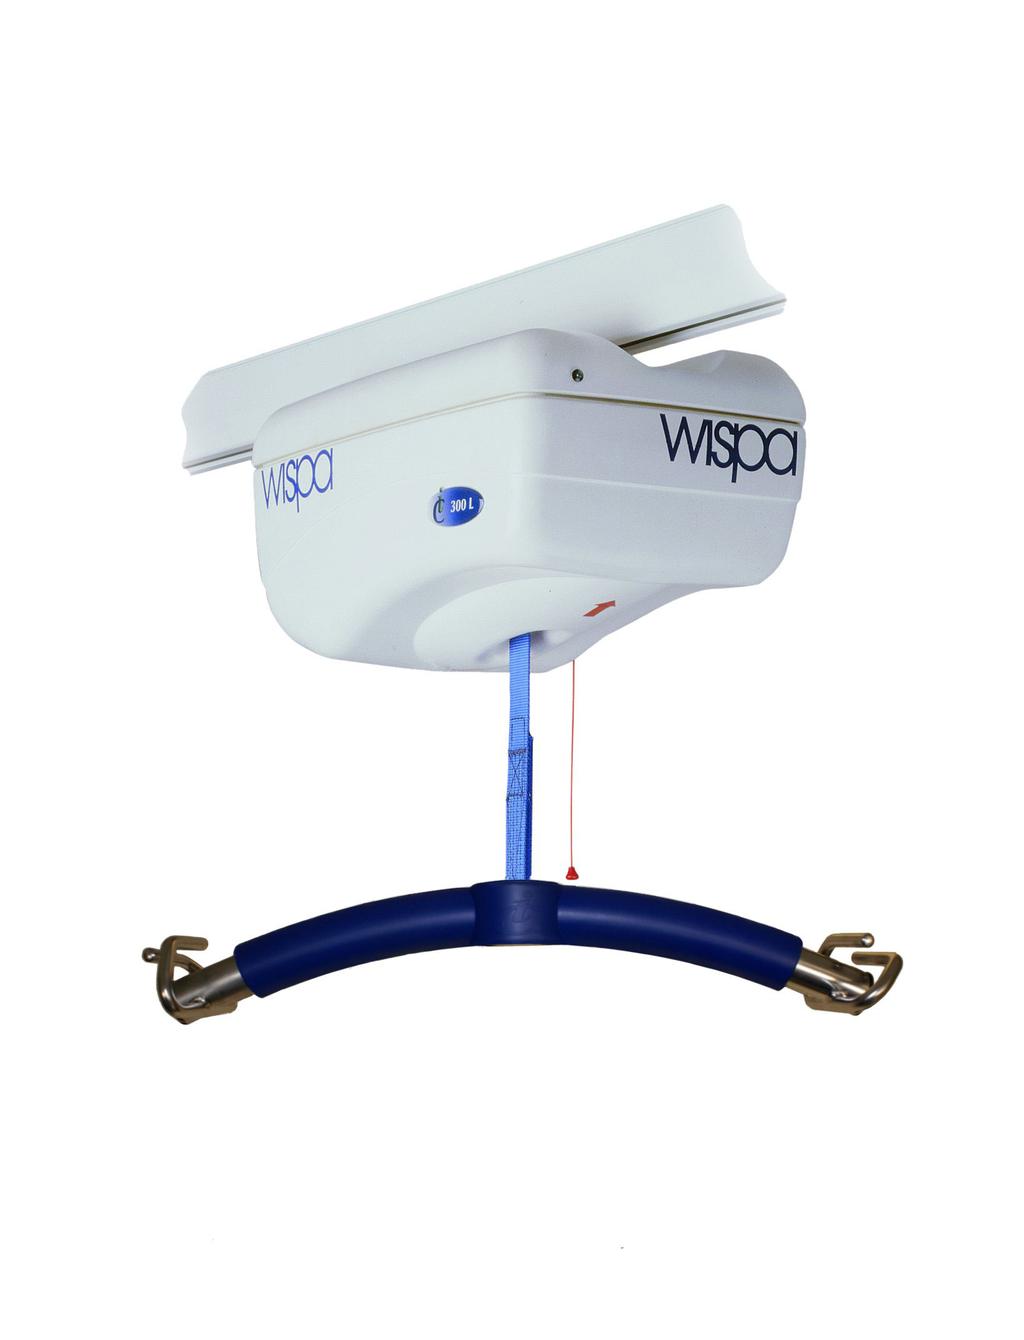 Wispa 200 and 300 Series Hoist Features Self diagnostic - beeps in set patterns to identify a problem Soft start/stop for smooth and